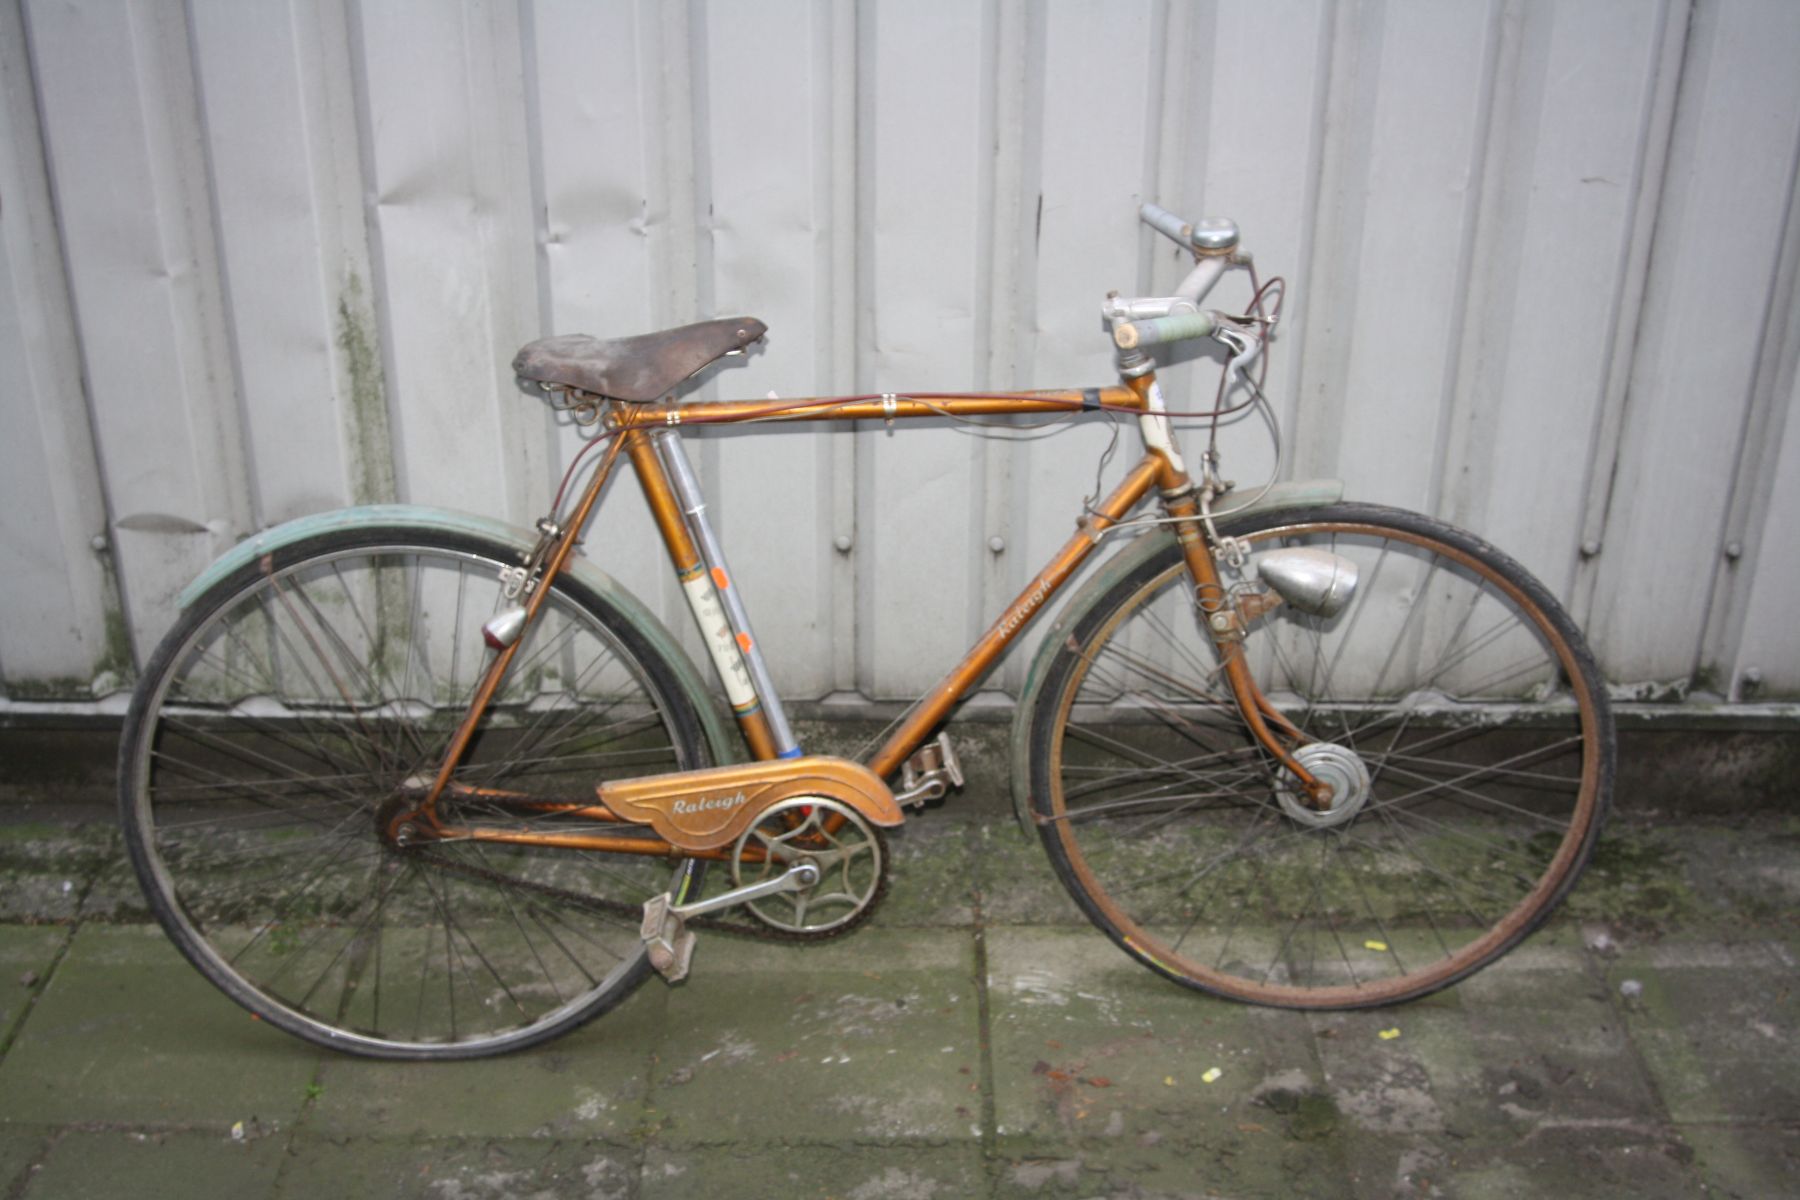 A BROWN GENTLEMANS RALEIGH GRAND TURISMO G.T. 250 BICYCLE, with a 21 inch frame and Sturmey Archer